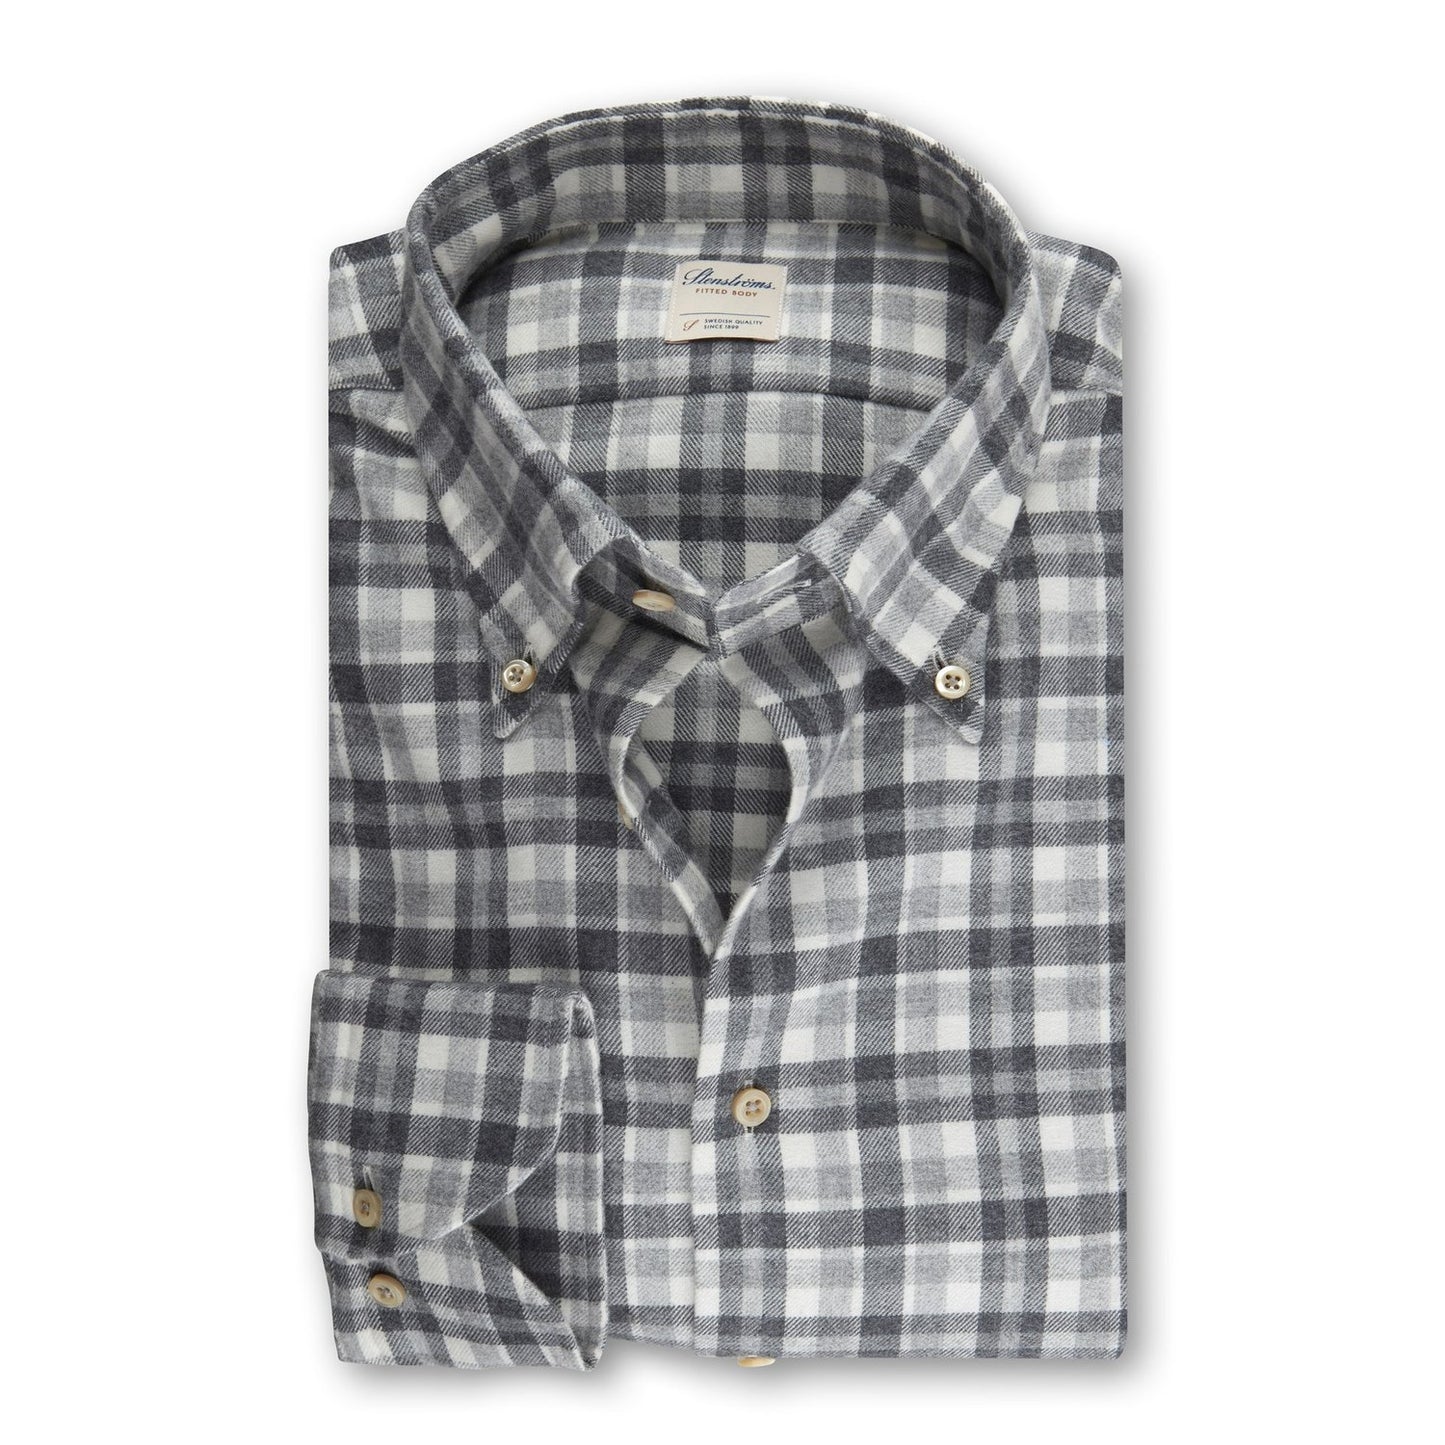 Stenströms Flannel Sport Shirt in Gray and White Check Pattern